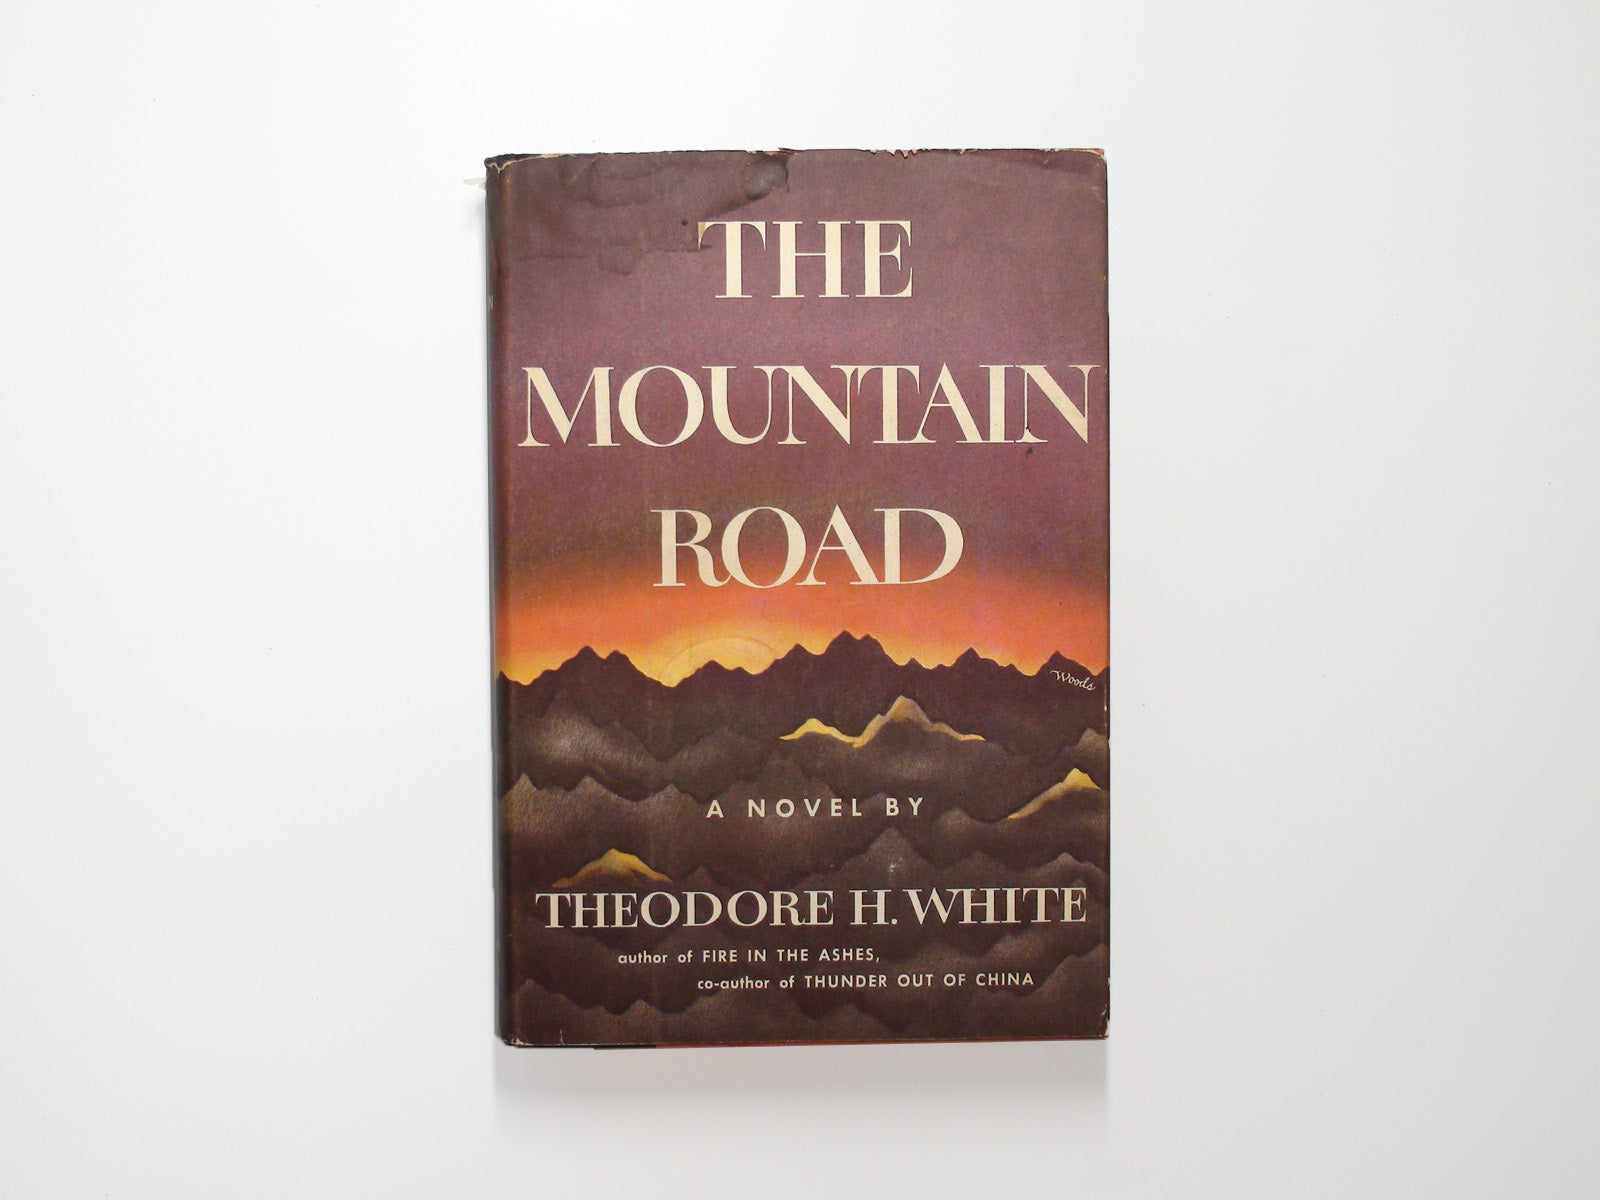 The Mountain Road, by Theodore H. White, Hardcover w/ D/J, Book Club, 1958